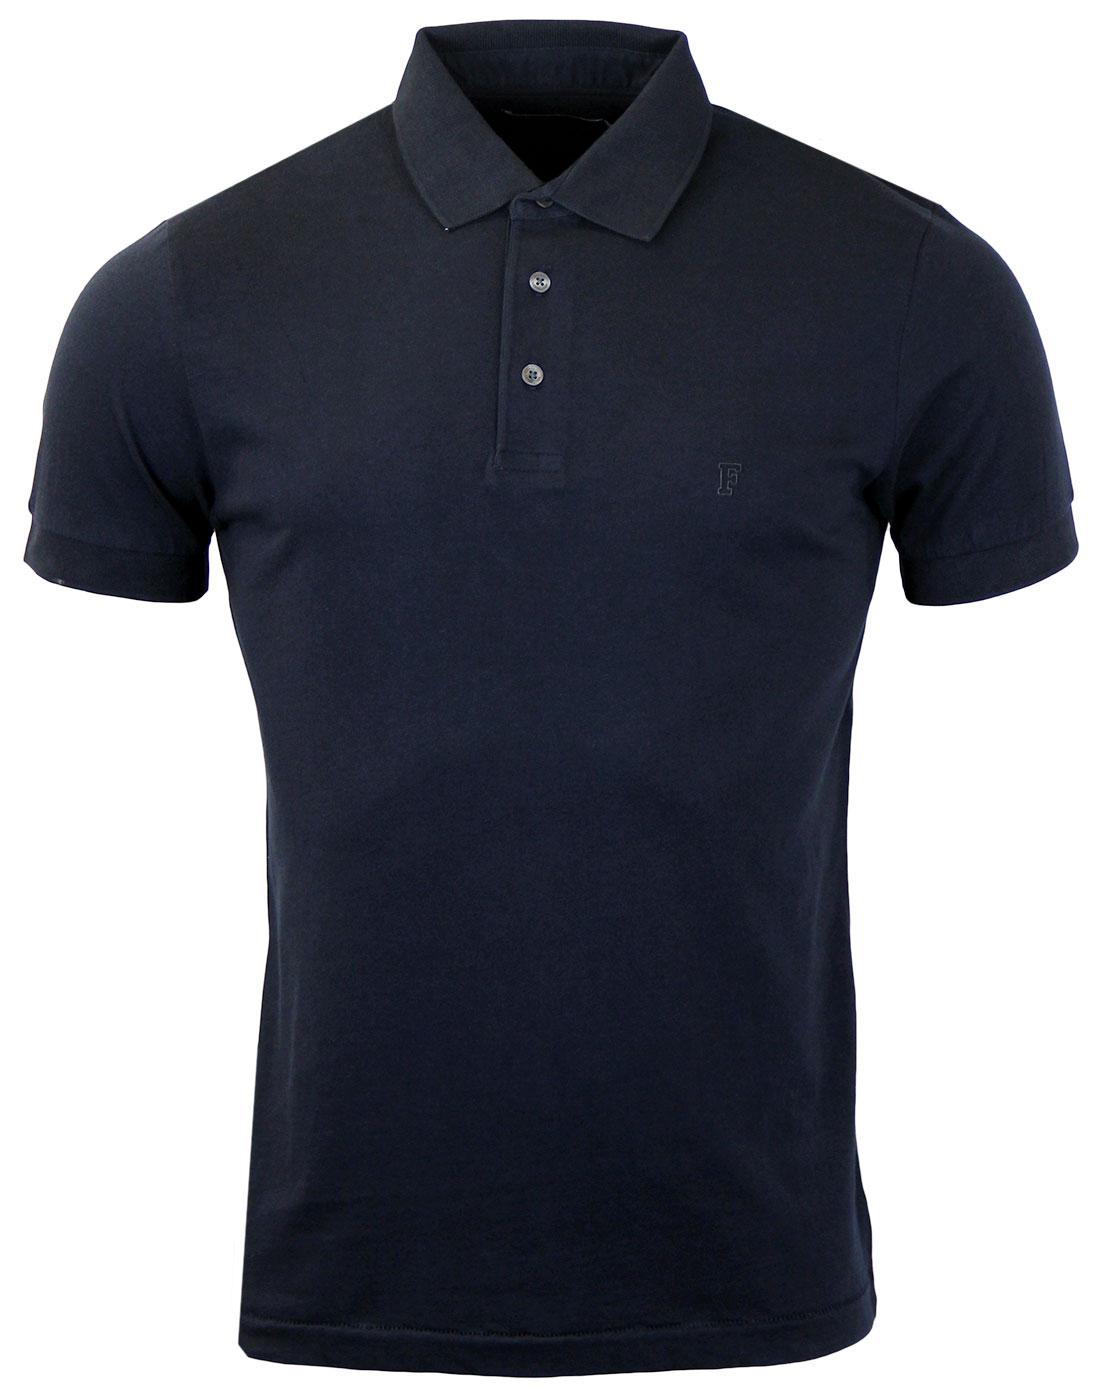 Sneezy FRENCH CONNECTION Retro Mod Jersey Polo MB